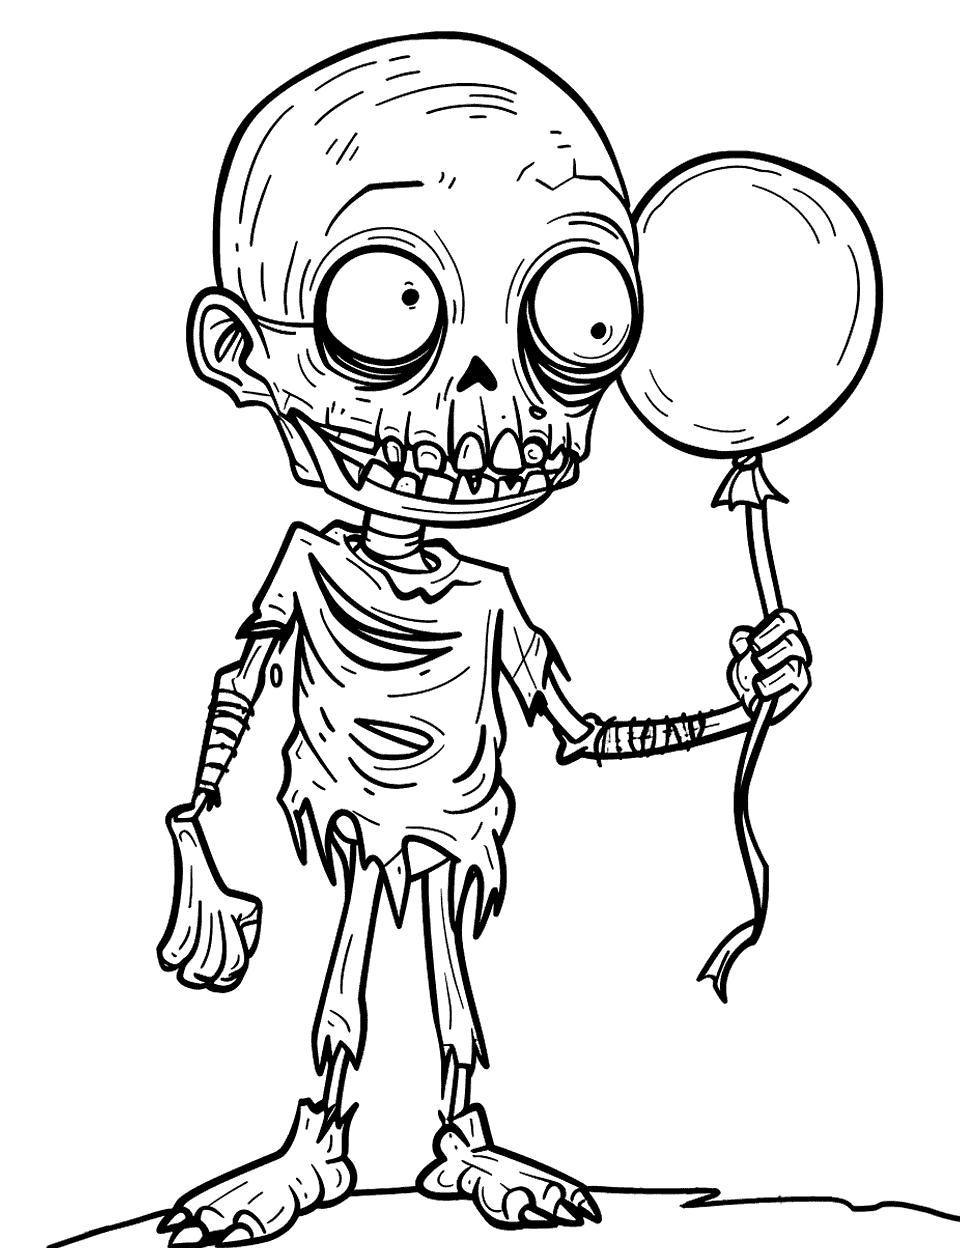 Kid-Friendly Zombie Coloring Page - A cartoonish, friendly zombie holding a balloon, suitable for children.